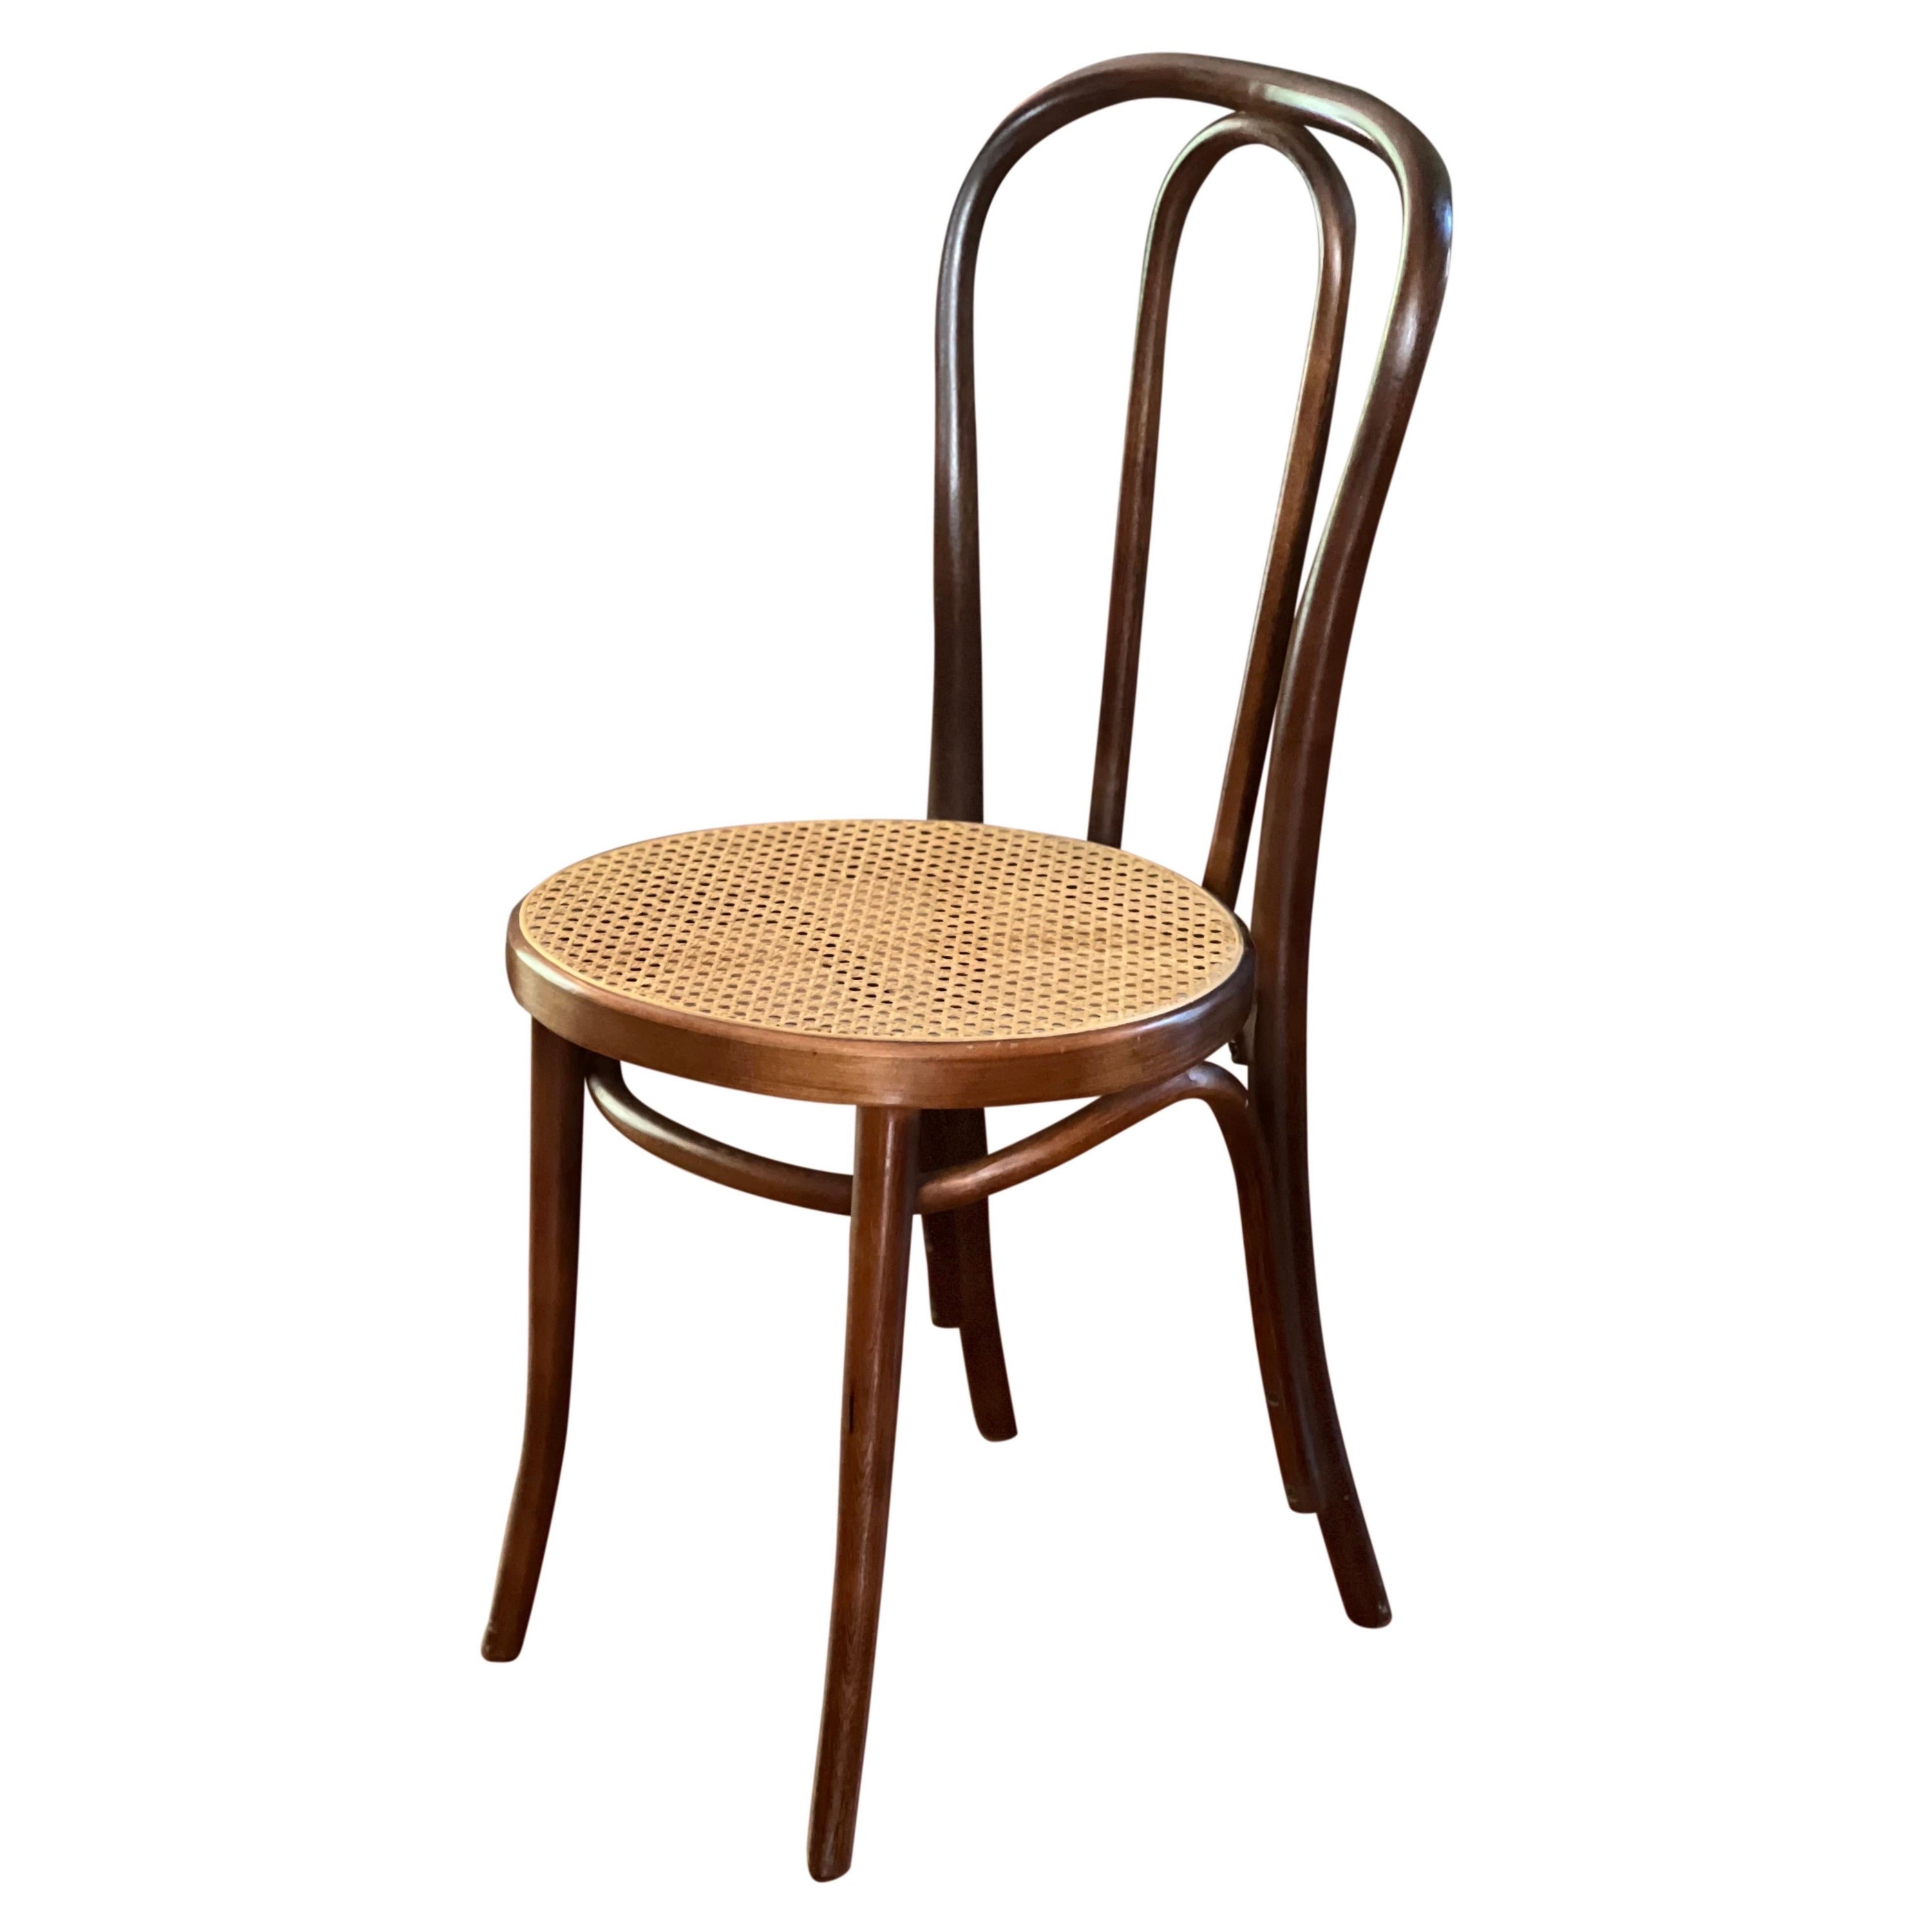 Thonet Bentwood Cane Bistro or Side Chair, 1920's